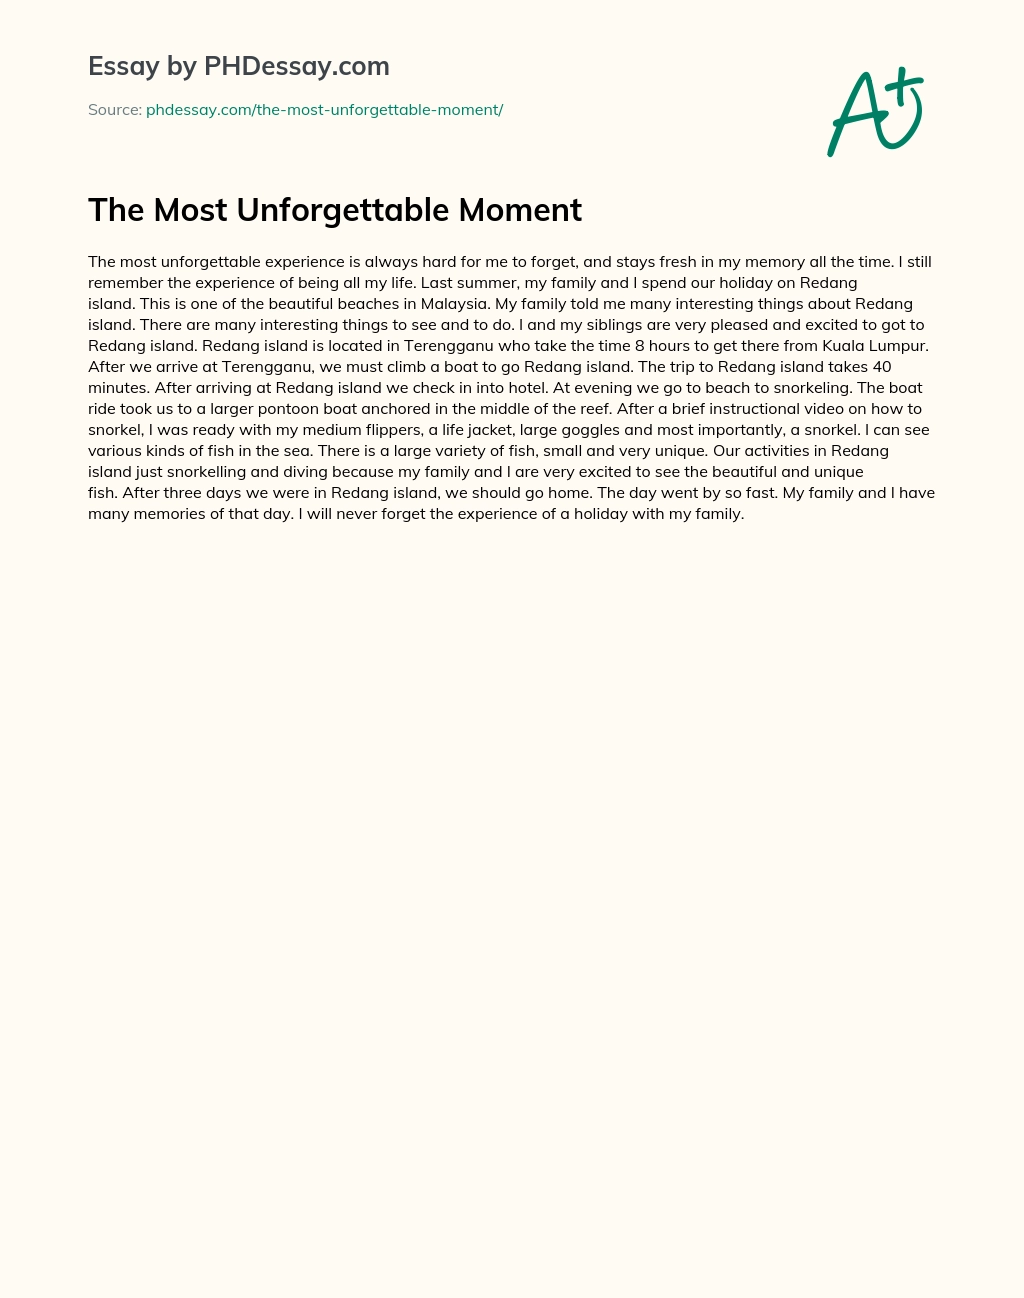 essay about unforgettable experience